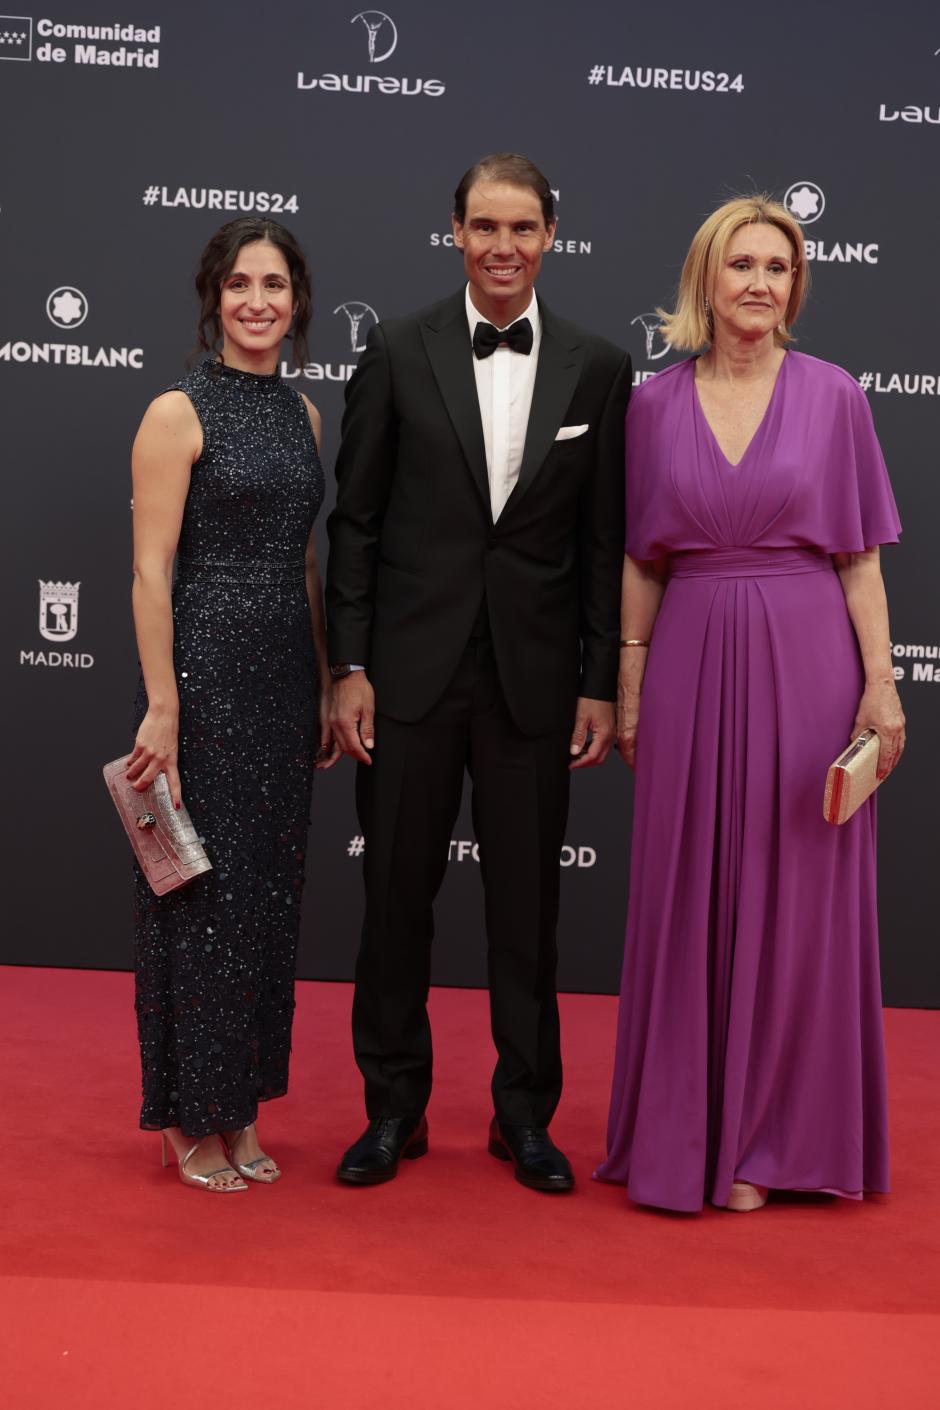 Tennisplayer Rafael Nadal and Xisca Perello with Ana Maria Parera at photocall for Laureus awards 2024 in Madrid on Monday, 22 April 2024.